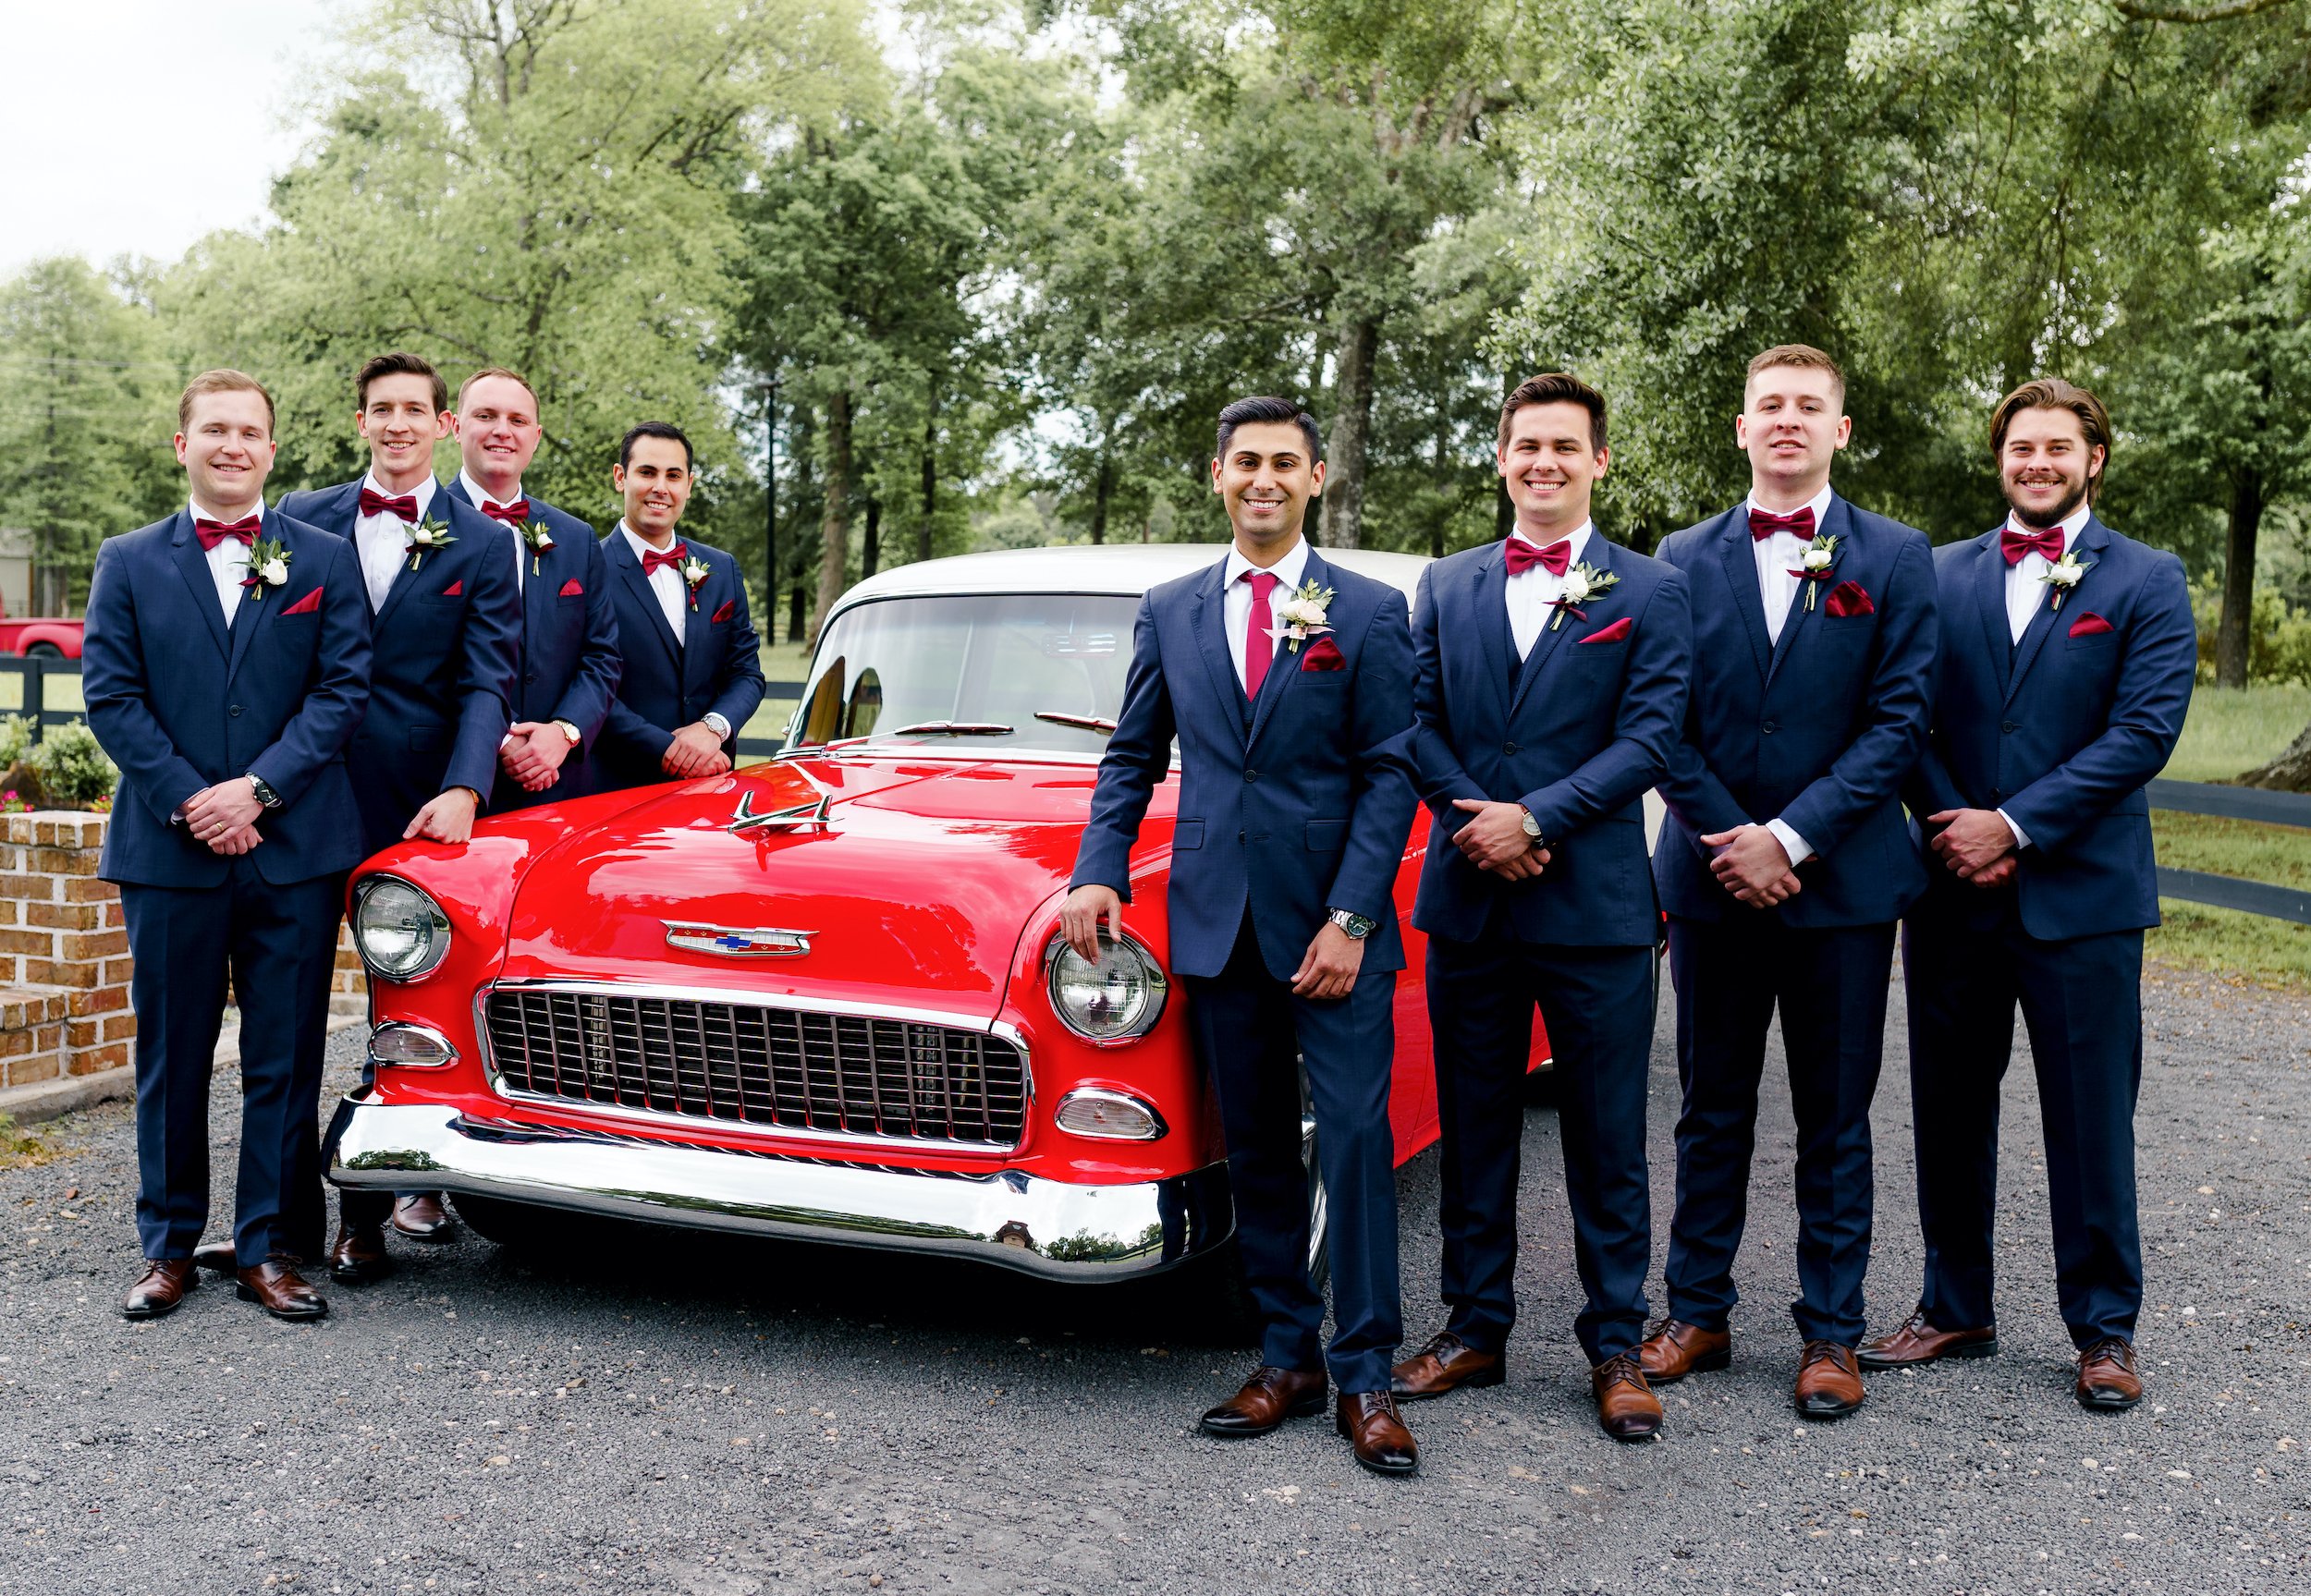 The groom and groomsmen smile in their navy tuxes next to the bright red classic car.